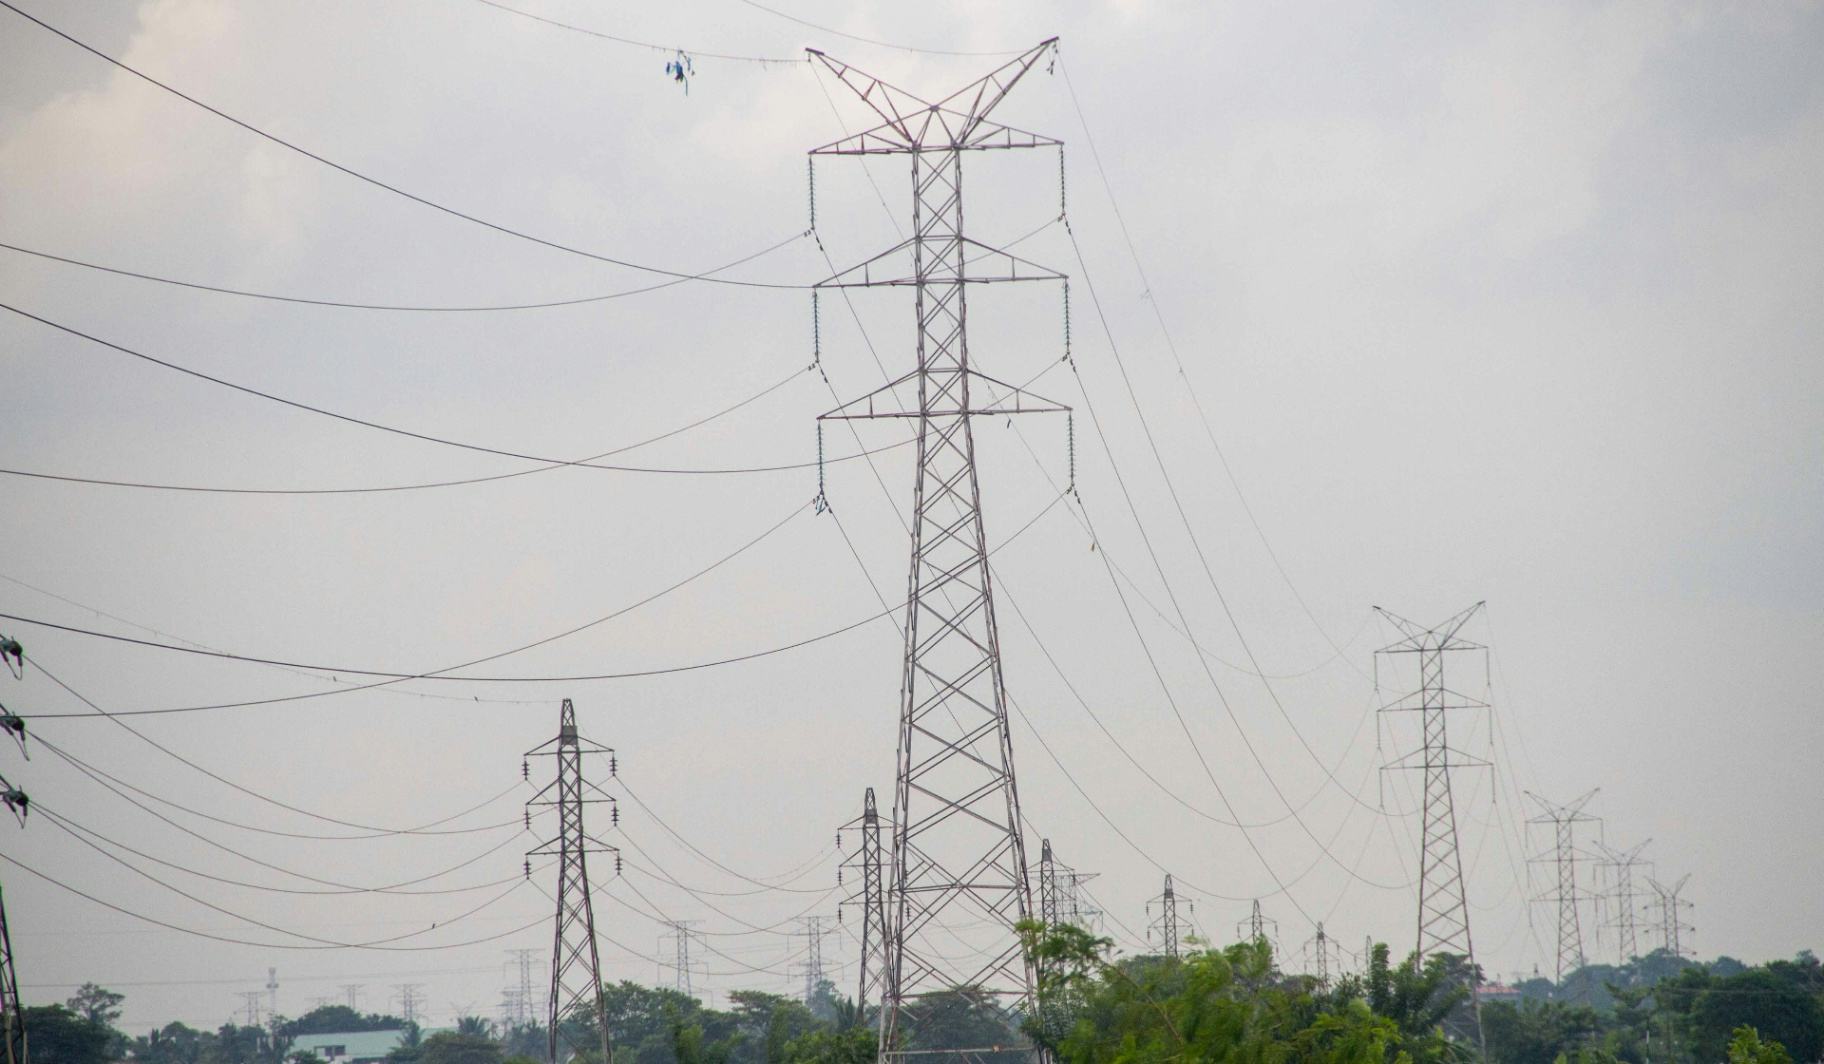 Power struggles: Electricity and Colombo’s working class poor